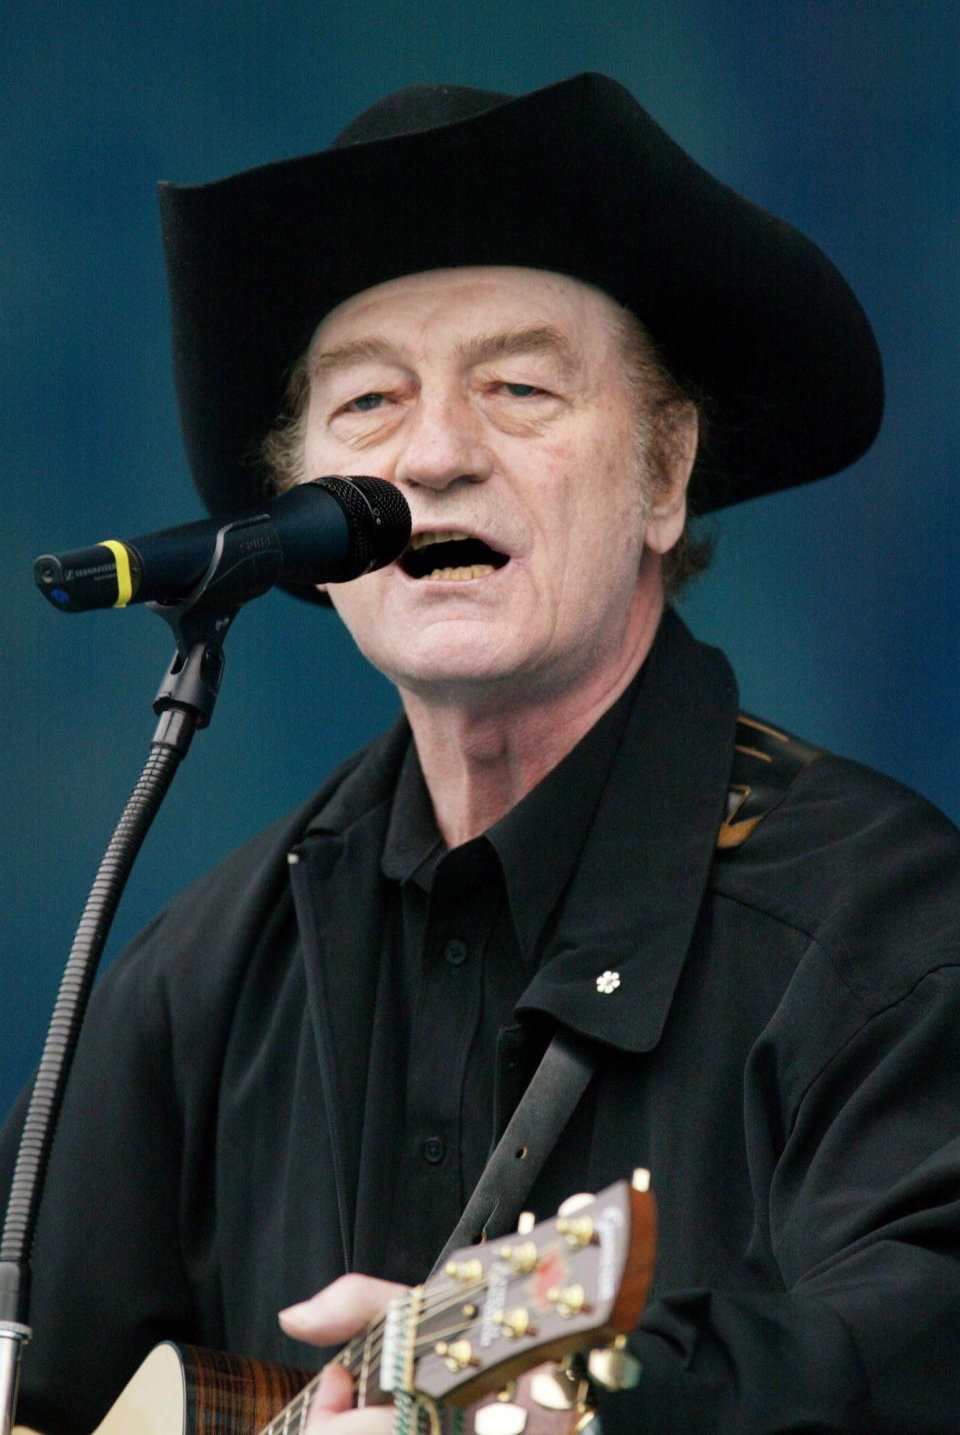 Stompin Tom Connors Net Worth